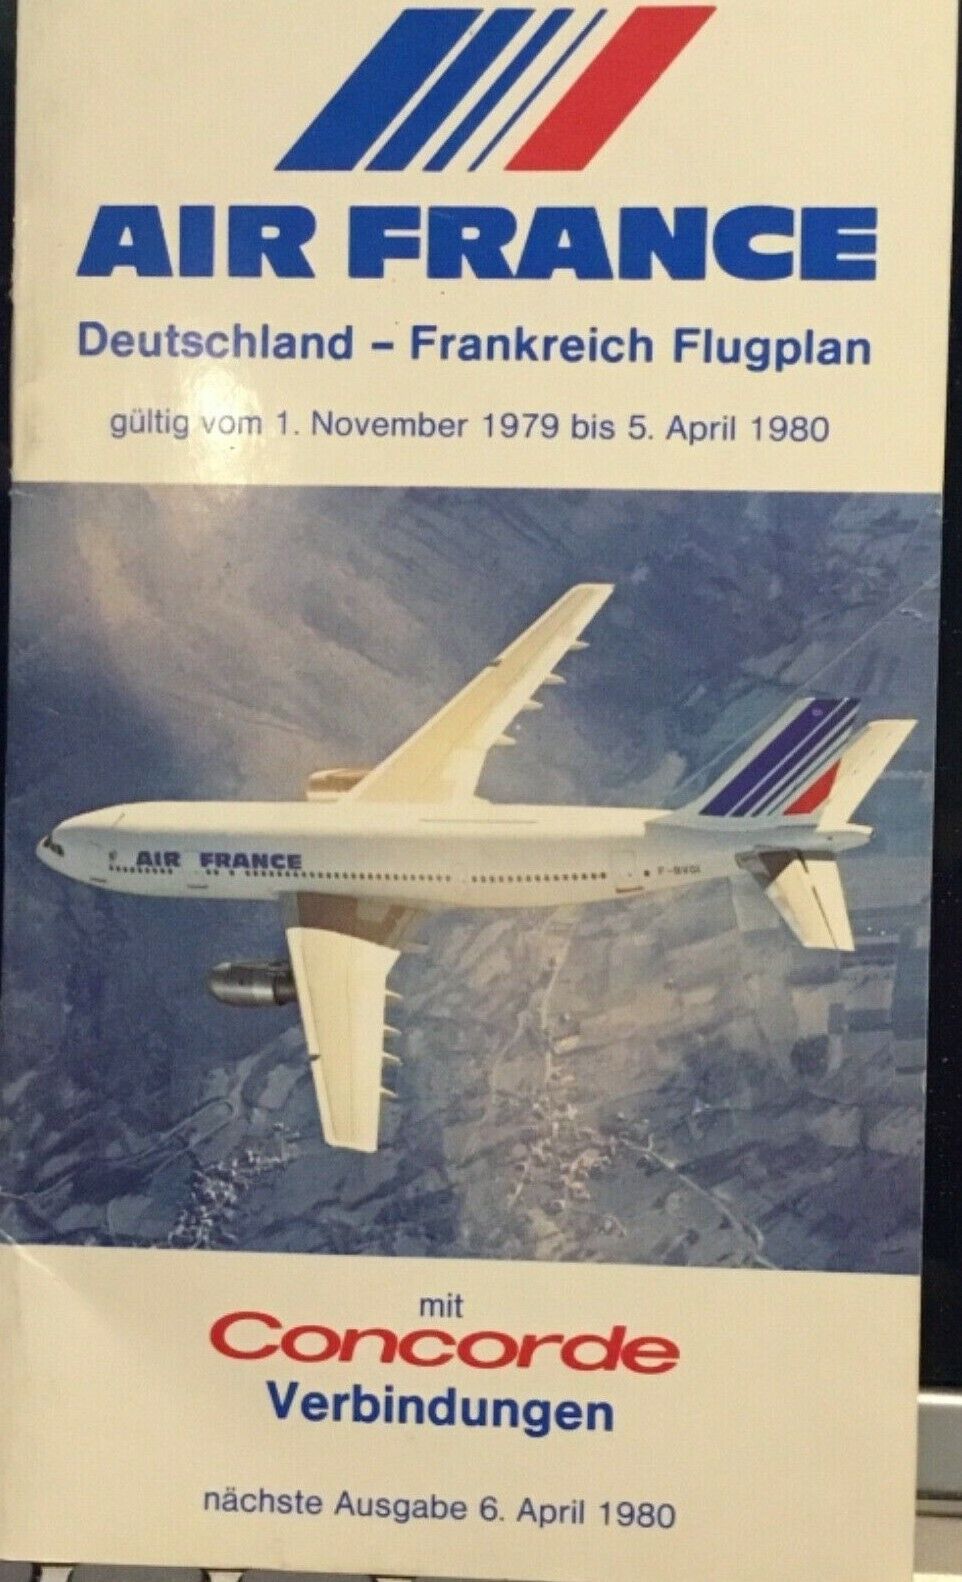 Air France Airlines - Concorde Germany Timetable - 6 April,1980